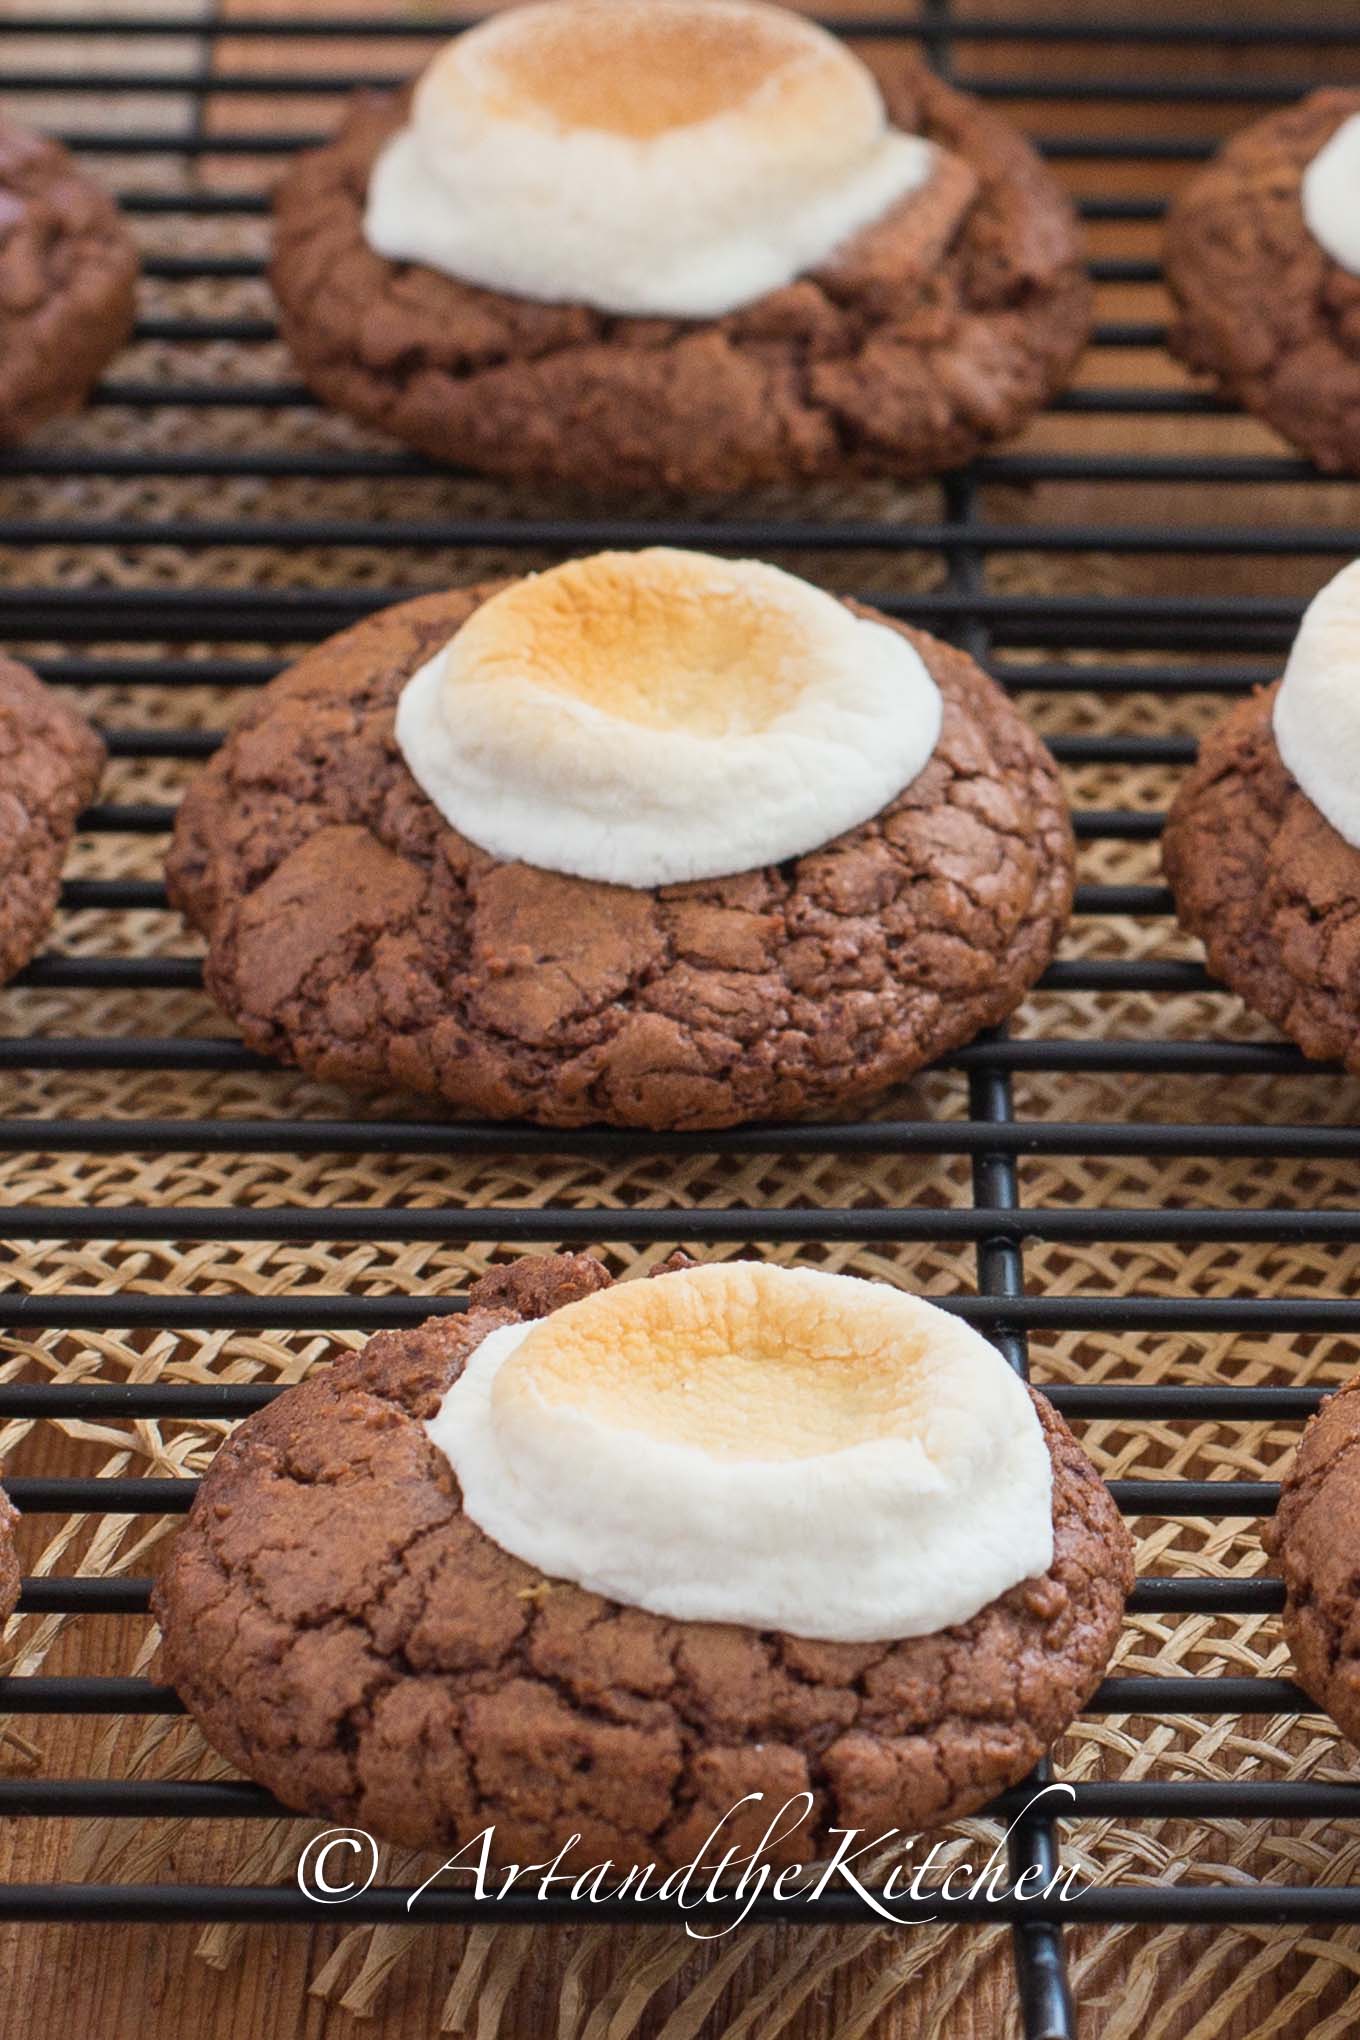 Chocolate cookies with toasted marshmallow on top on black baking rack.